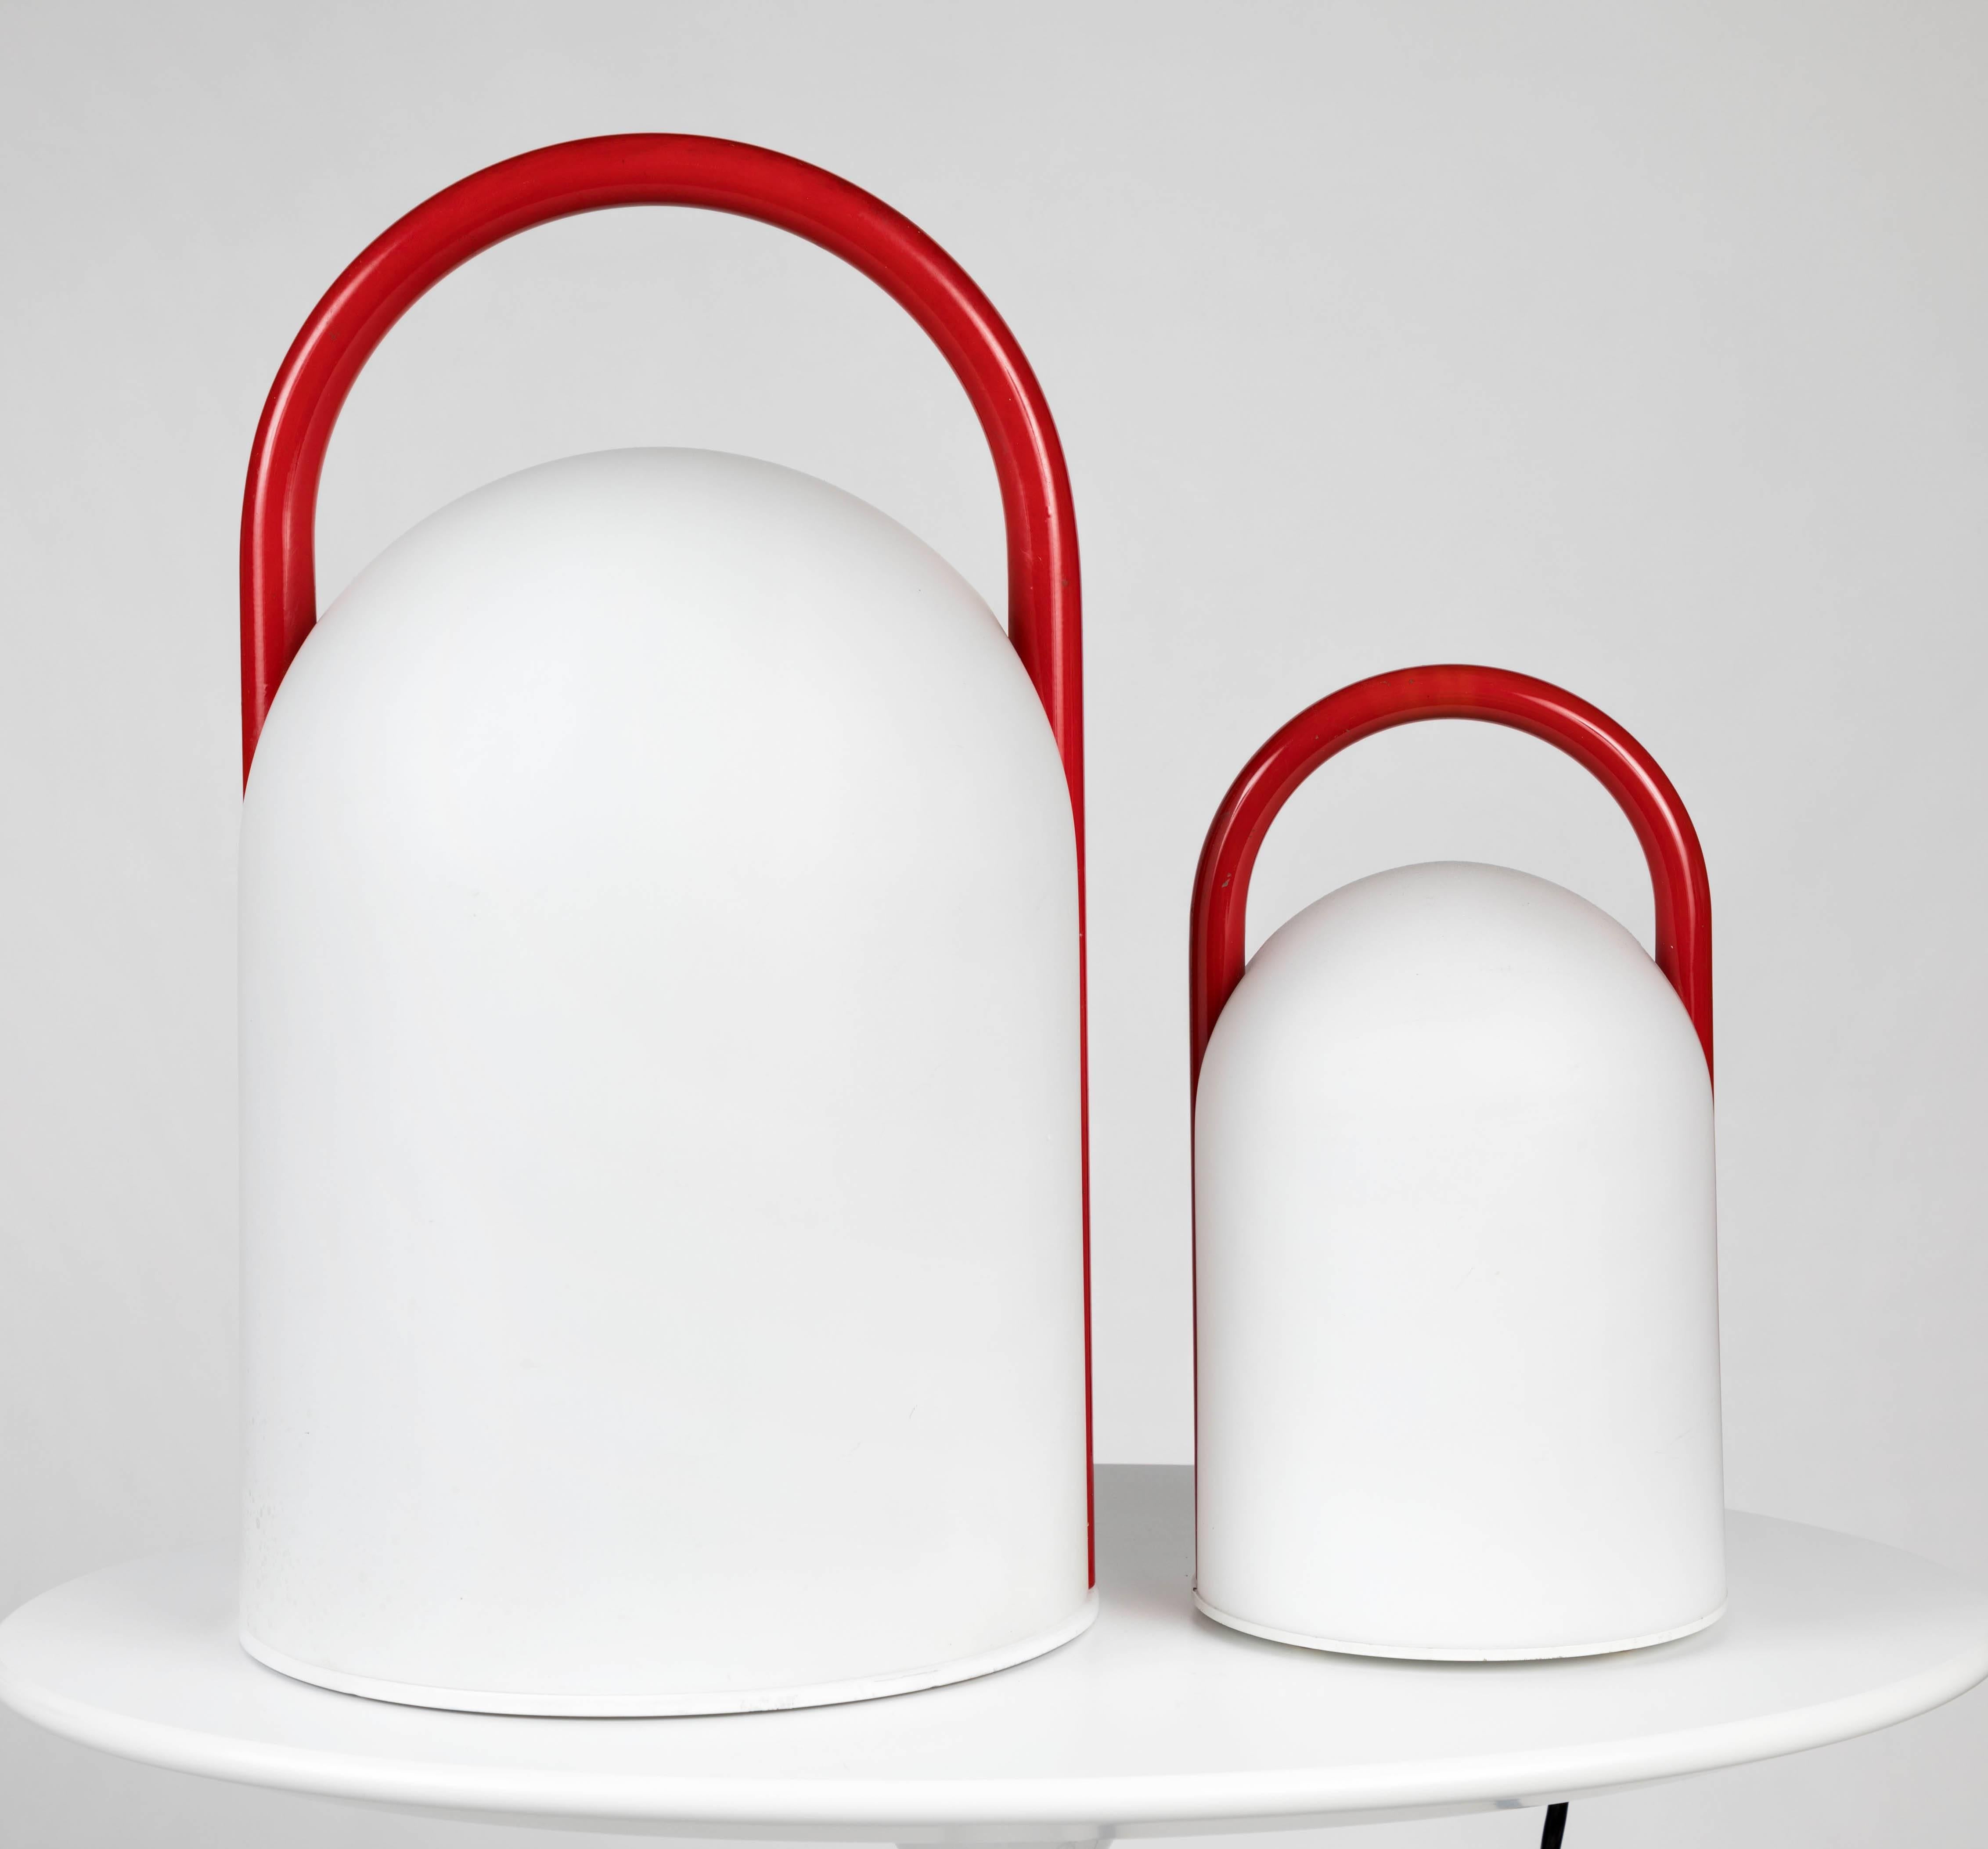 Large Romolo Lanciani 'Tender' table lamp for Tronconi. A rare large-scale example executed in opaline glass and red enameled metal, circa 1980s, Italy. A surprisingly refined and minimal design, especially for its time and place.

Tronconi was a